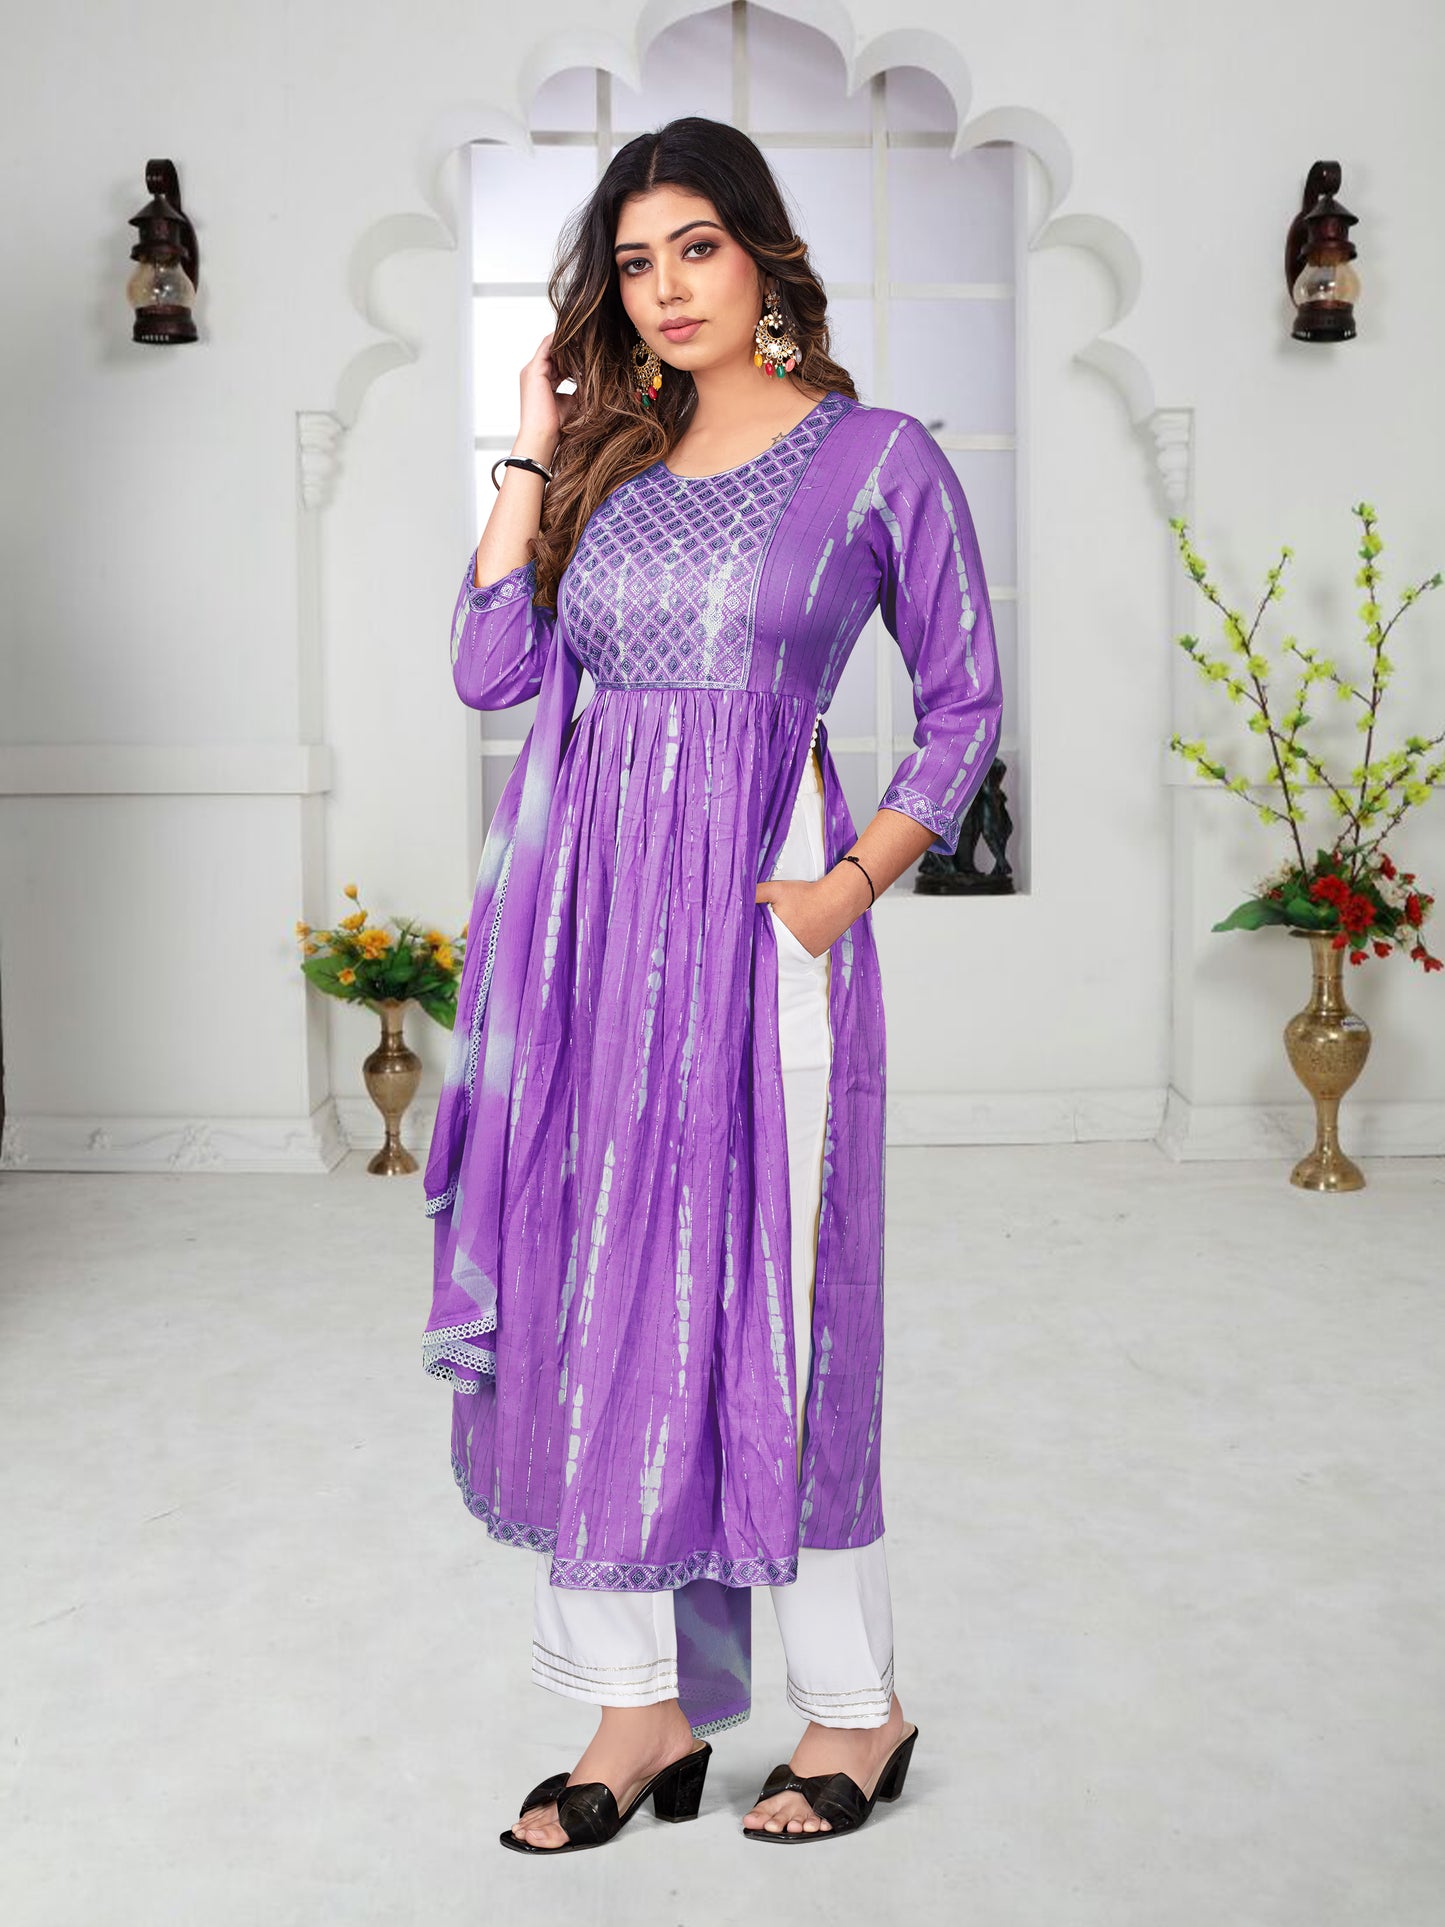 Falak Nayra Cut Set Rayon Fabric With Embroidery Work